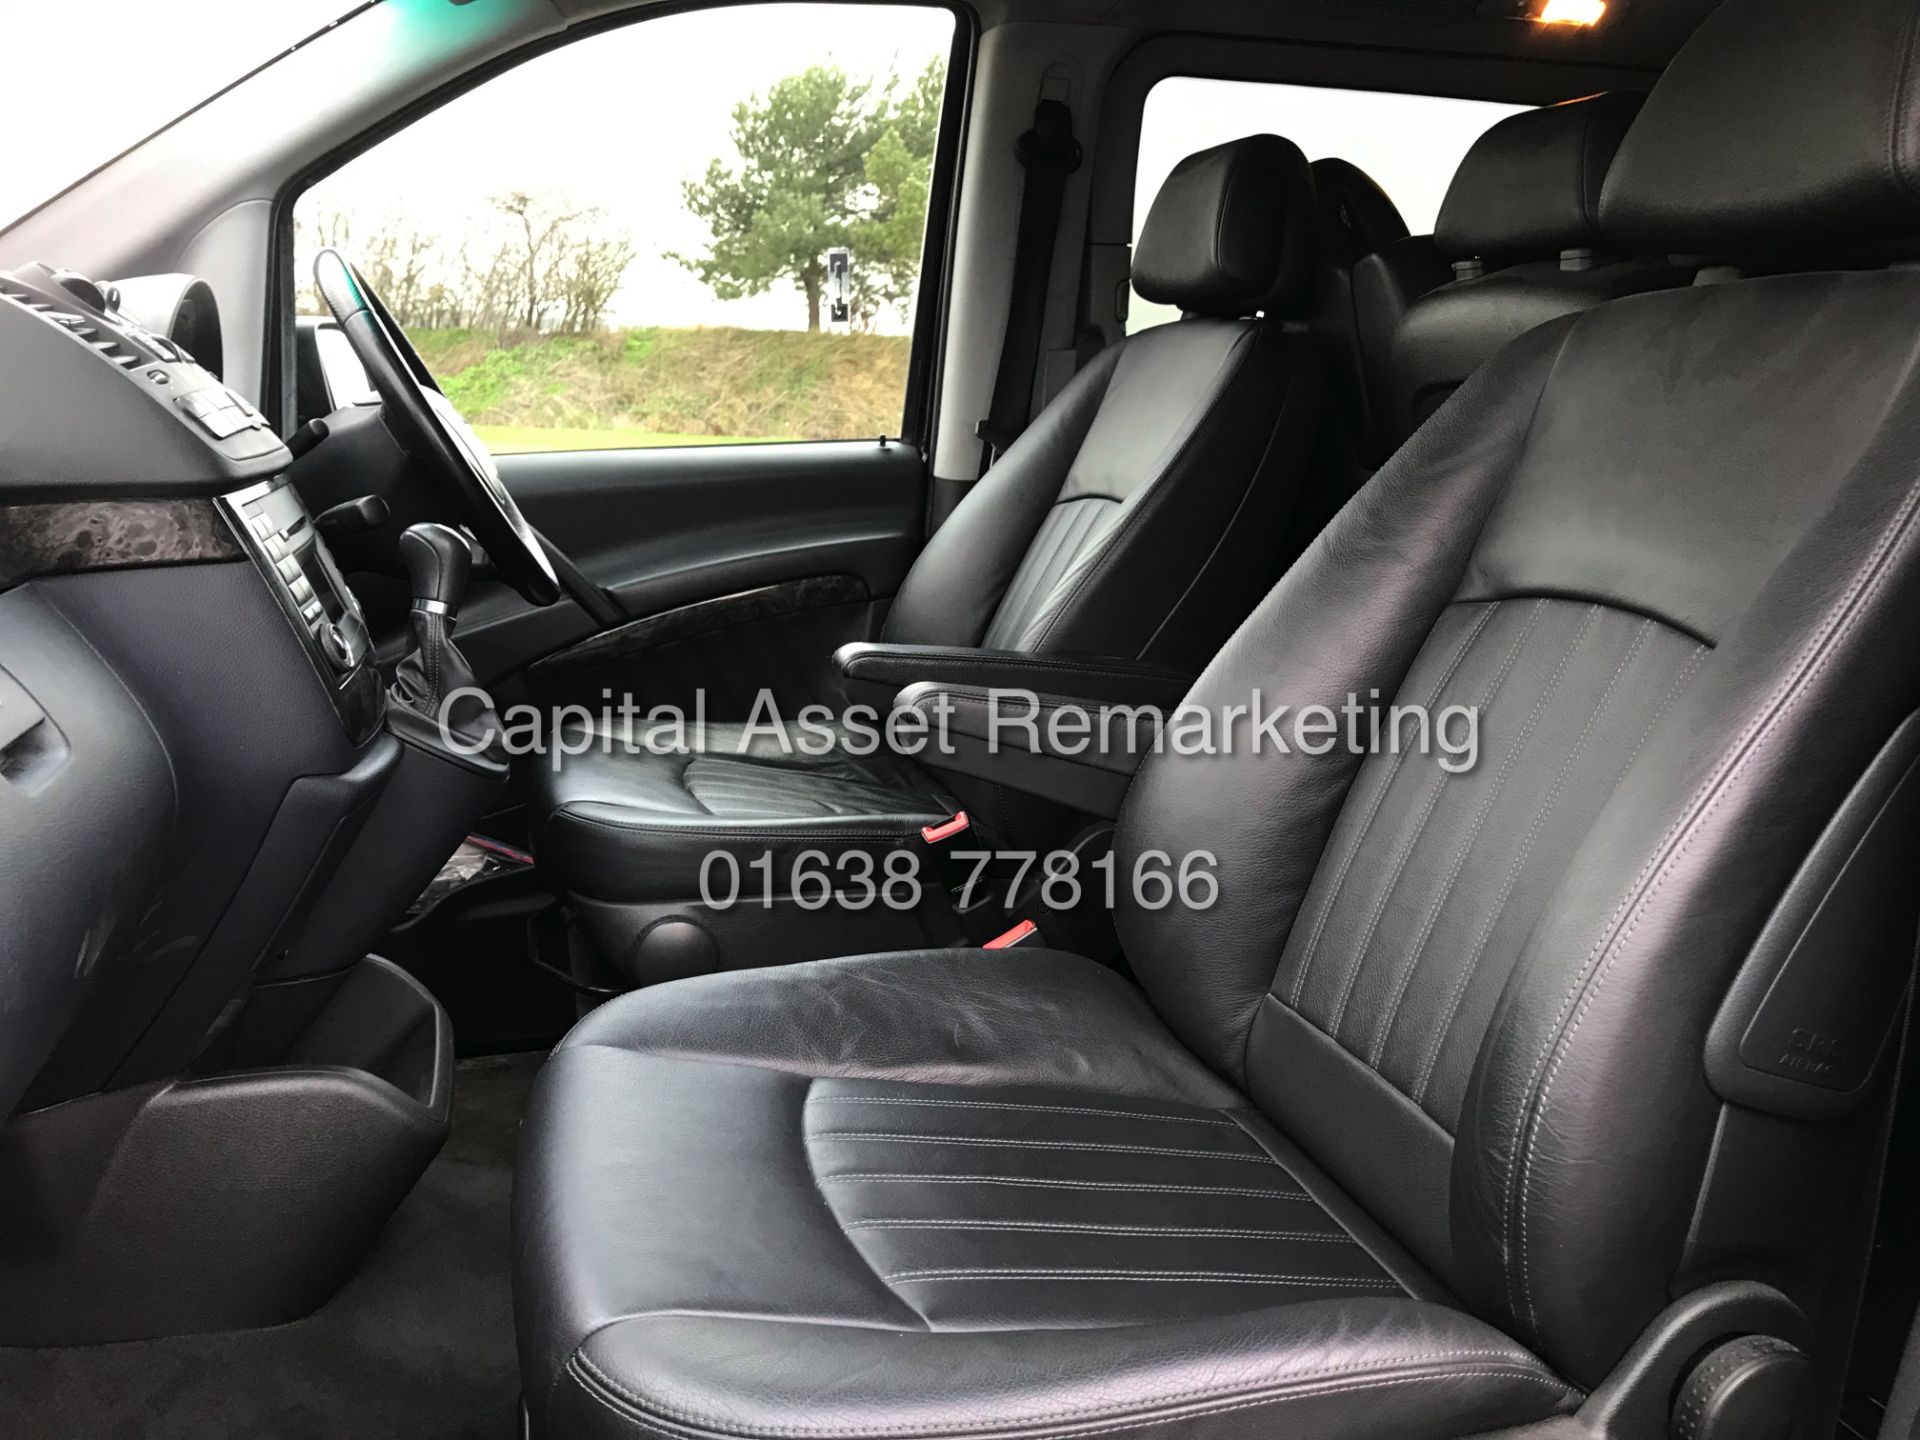 (ON SALE) MERCEDES VIANO 2.2CDI "AMBIENET" XLWB 8 SEATER (14 REG) 1 OWNER - FULLY LOADED - LEATHER - Image 15 of 28